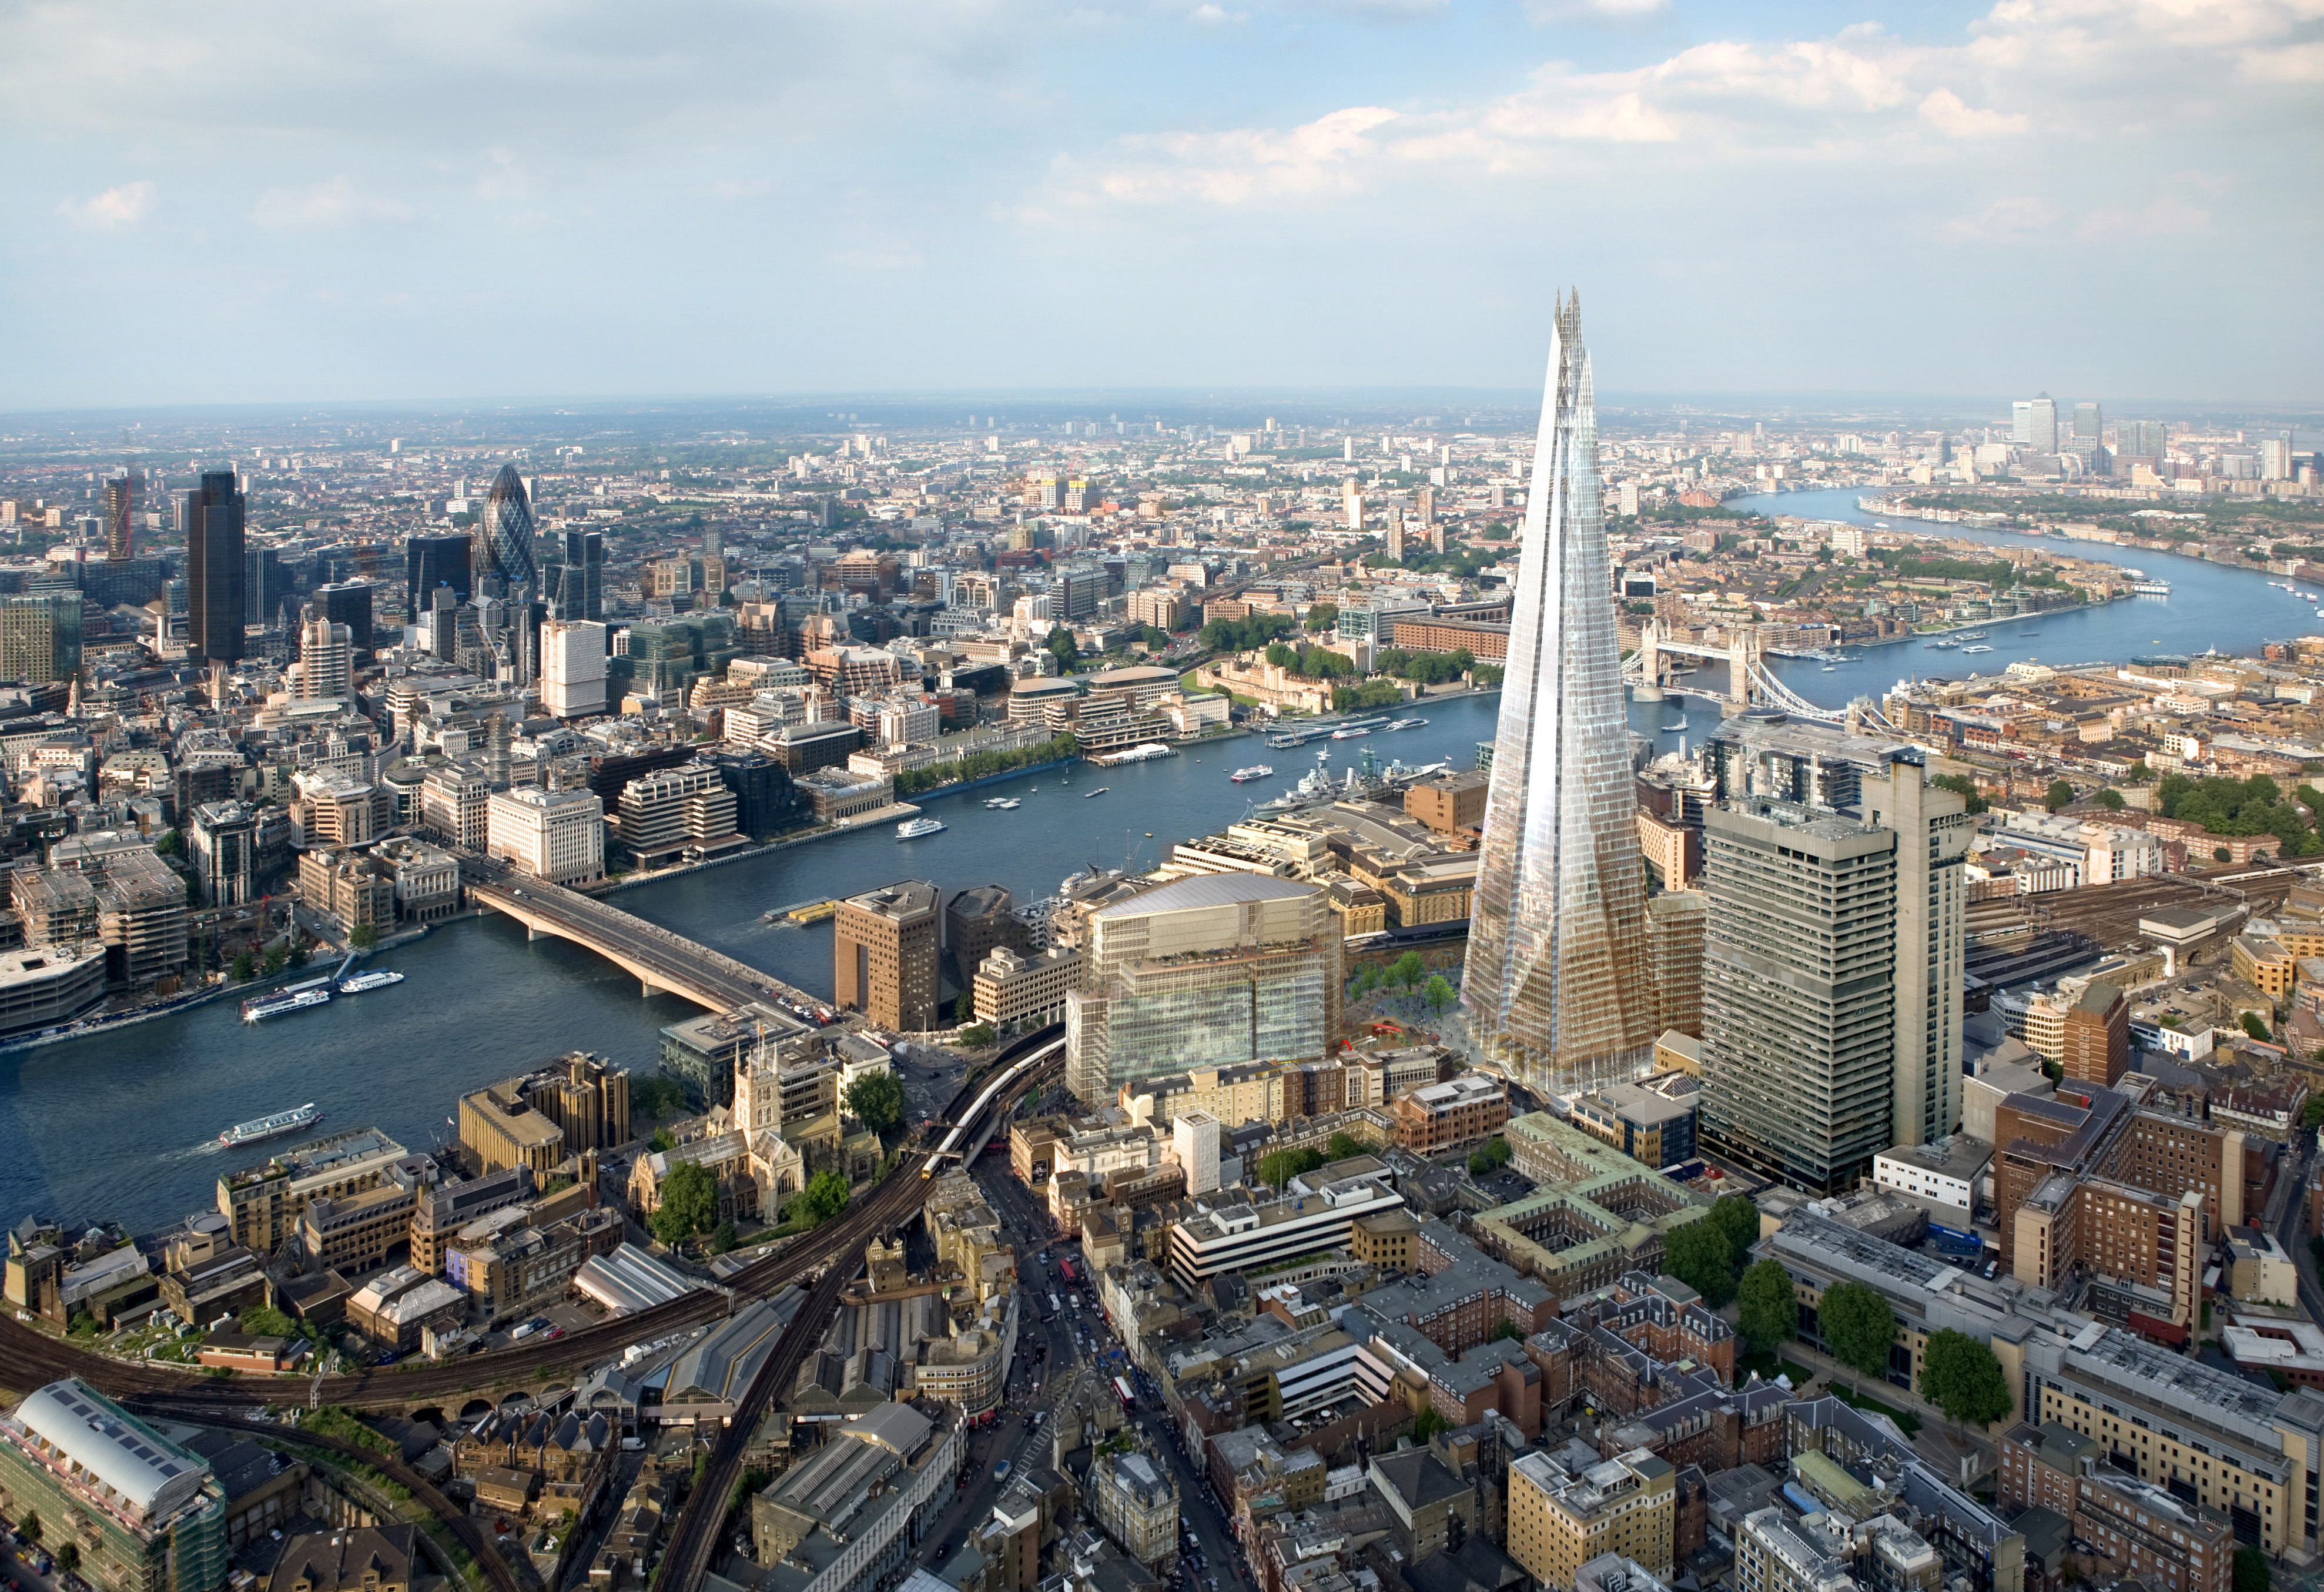 The Shard A Landmark To See The City Of London In 360°